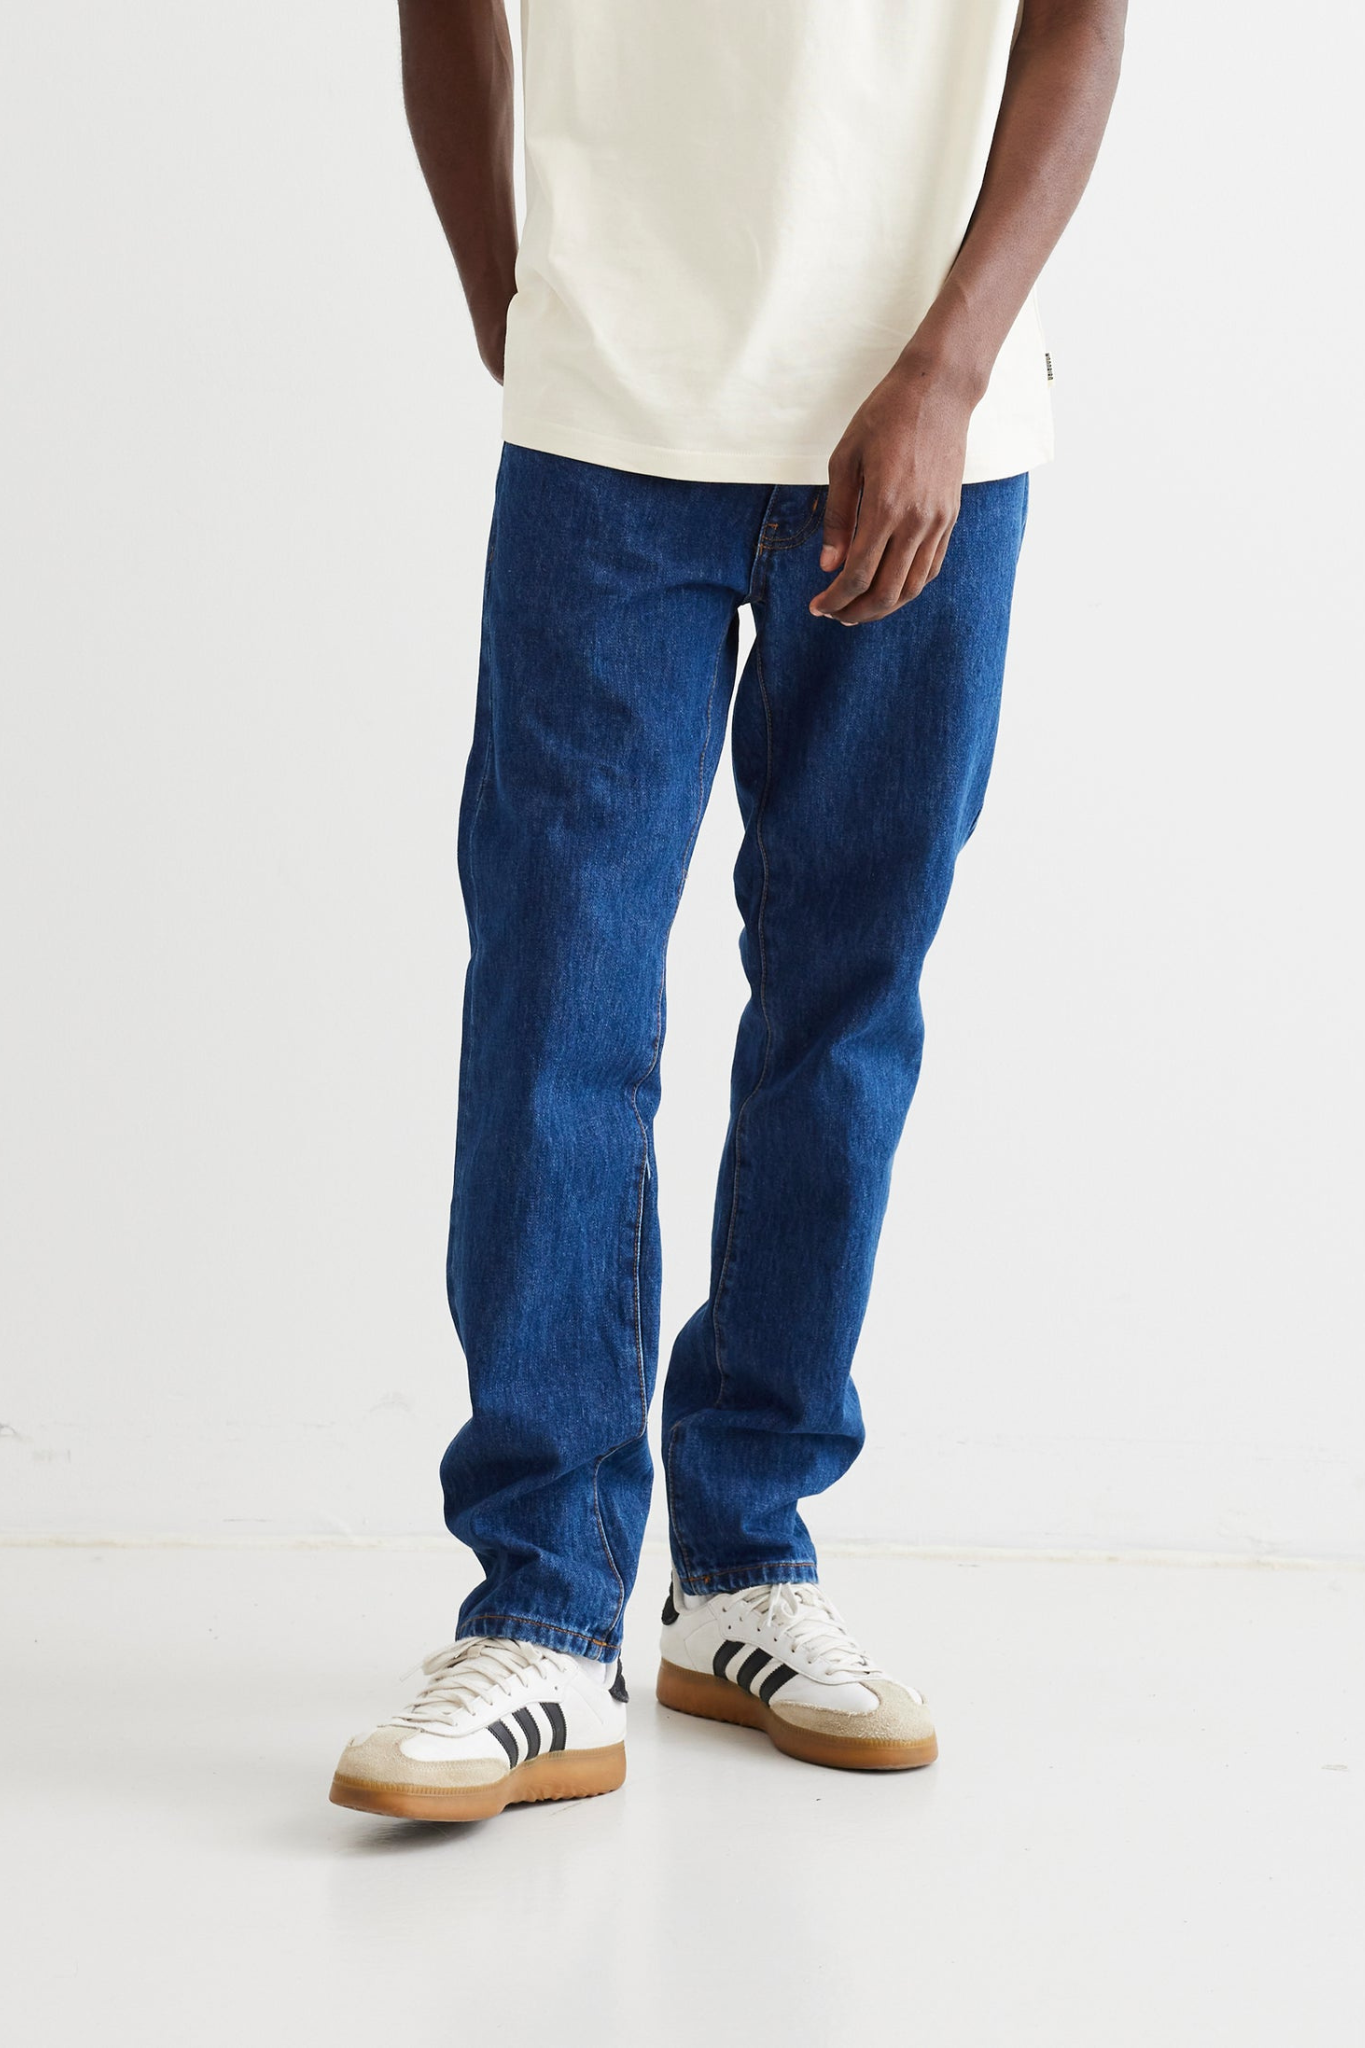 DOC 90s RINSE JEANS